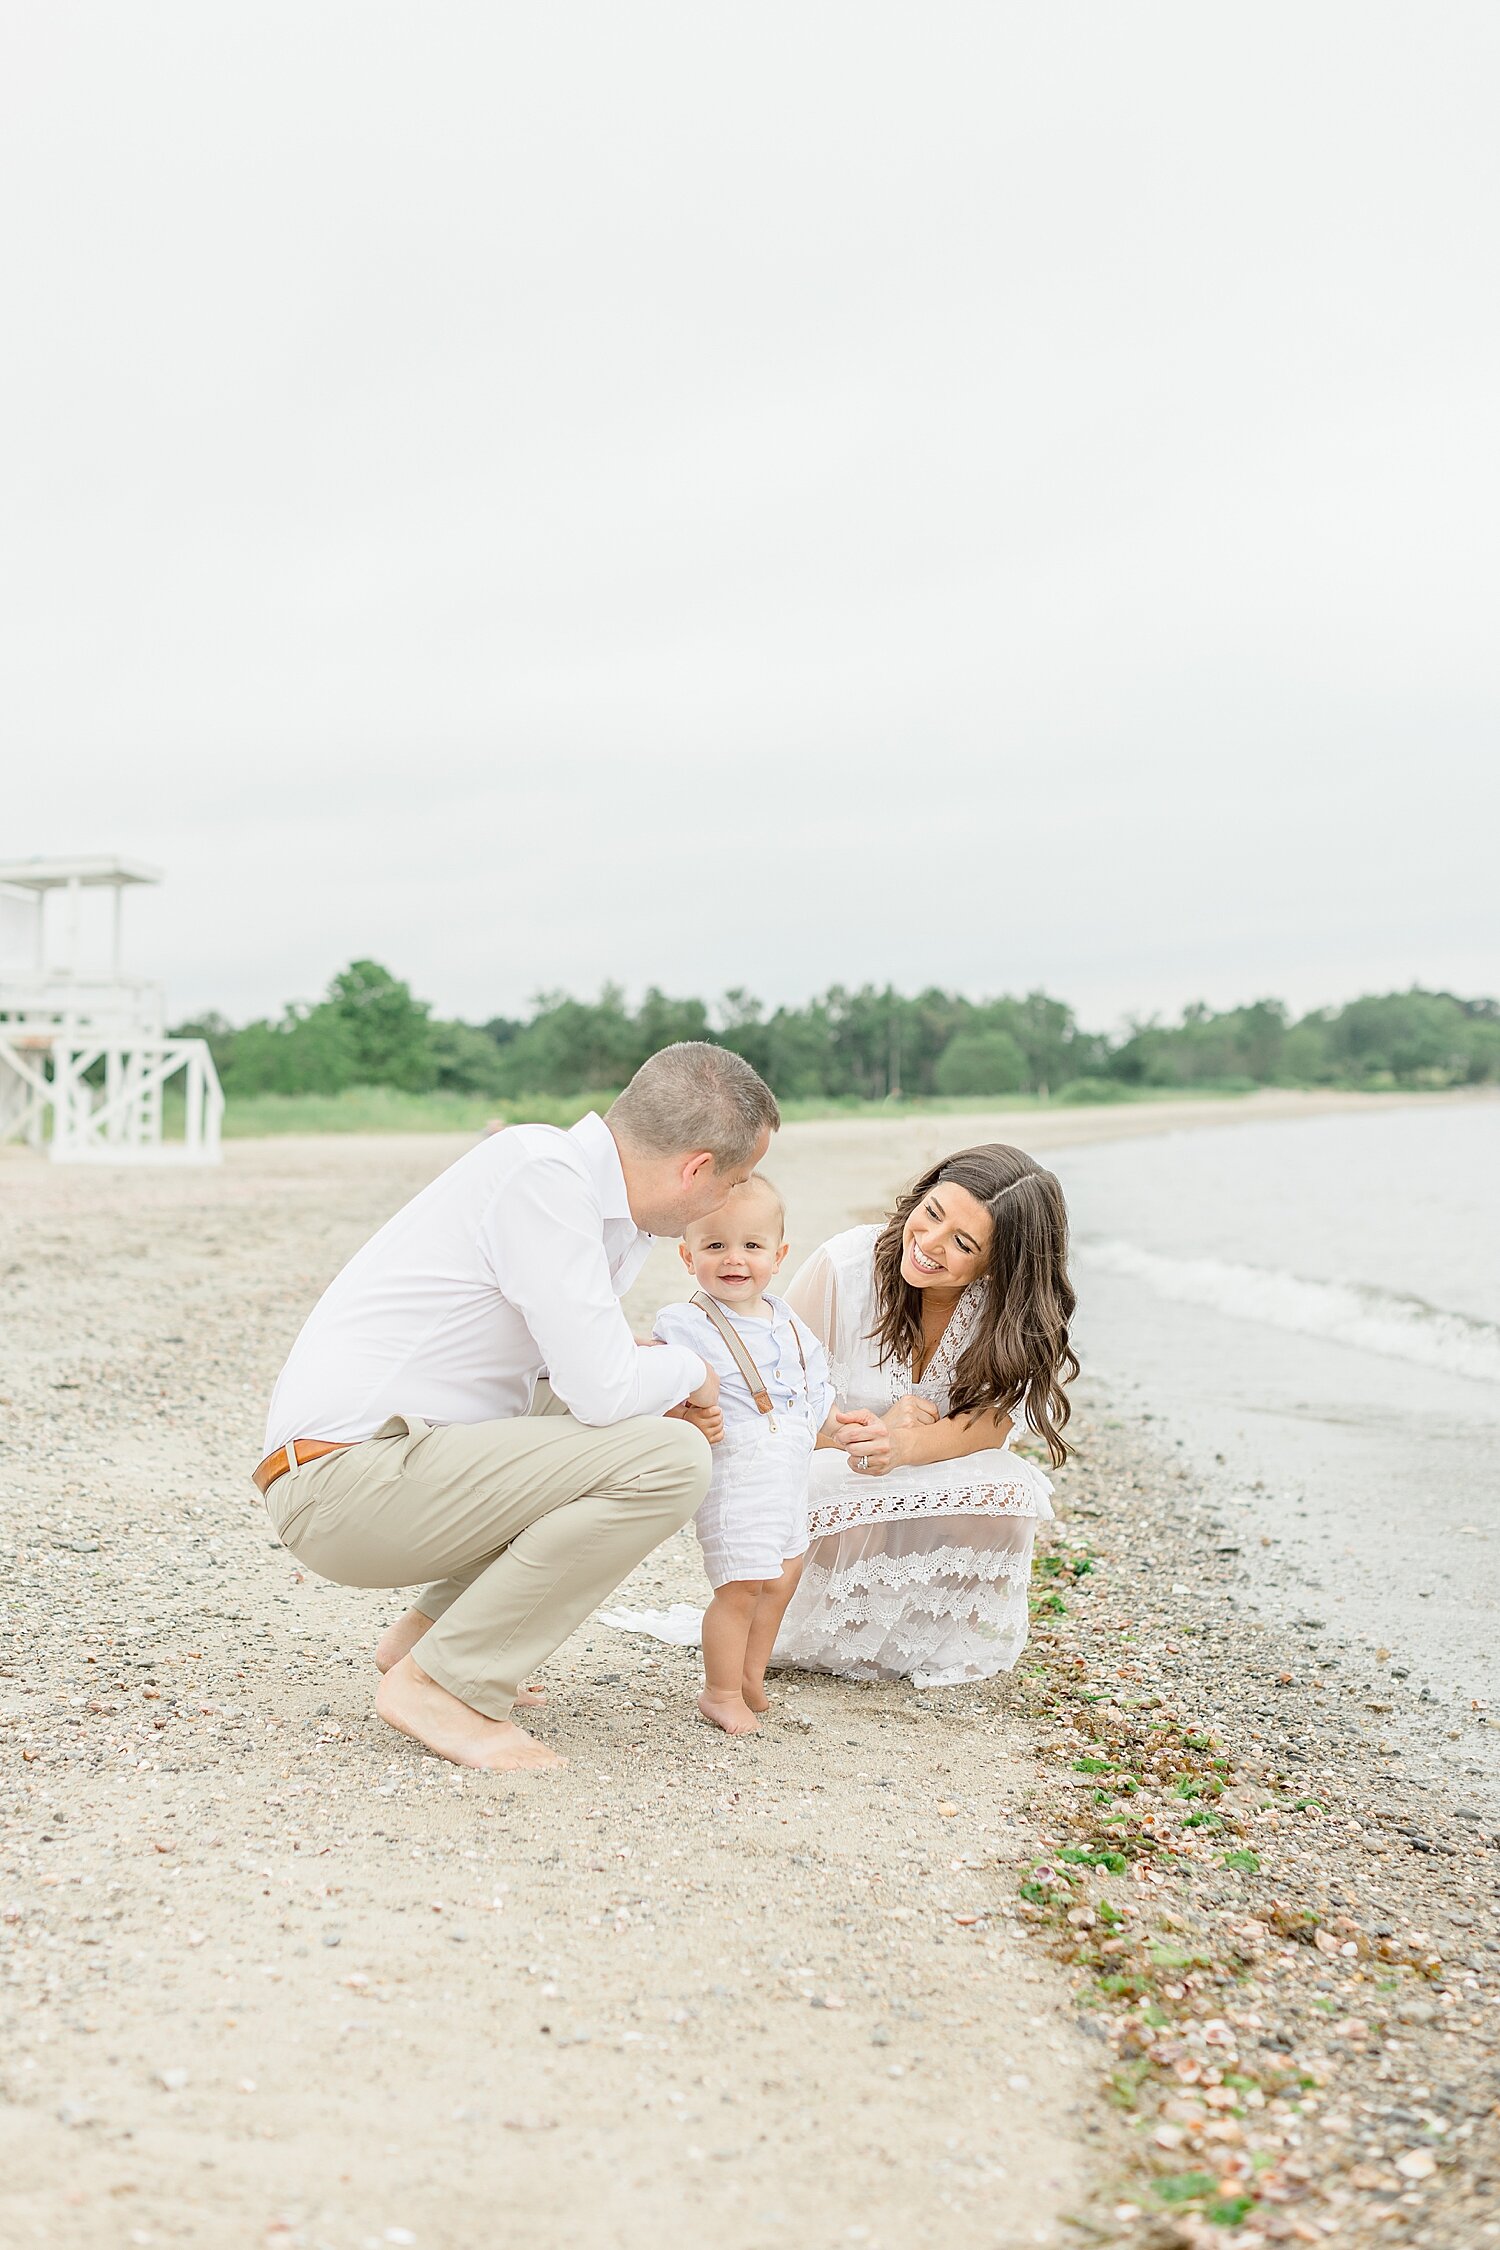 Family sitting along the water for photos with son | Kristin Wood Photography